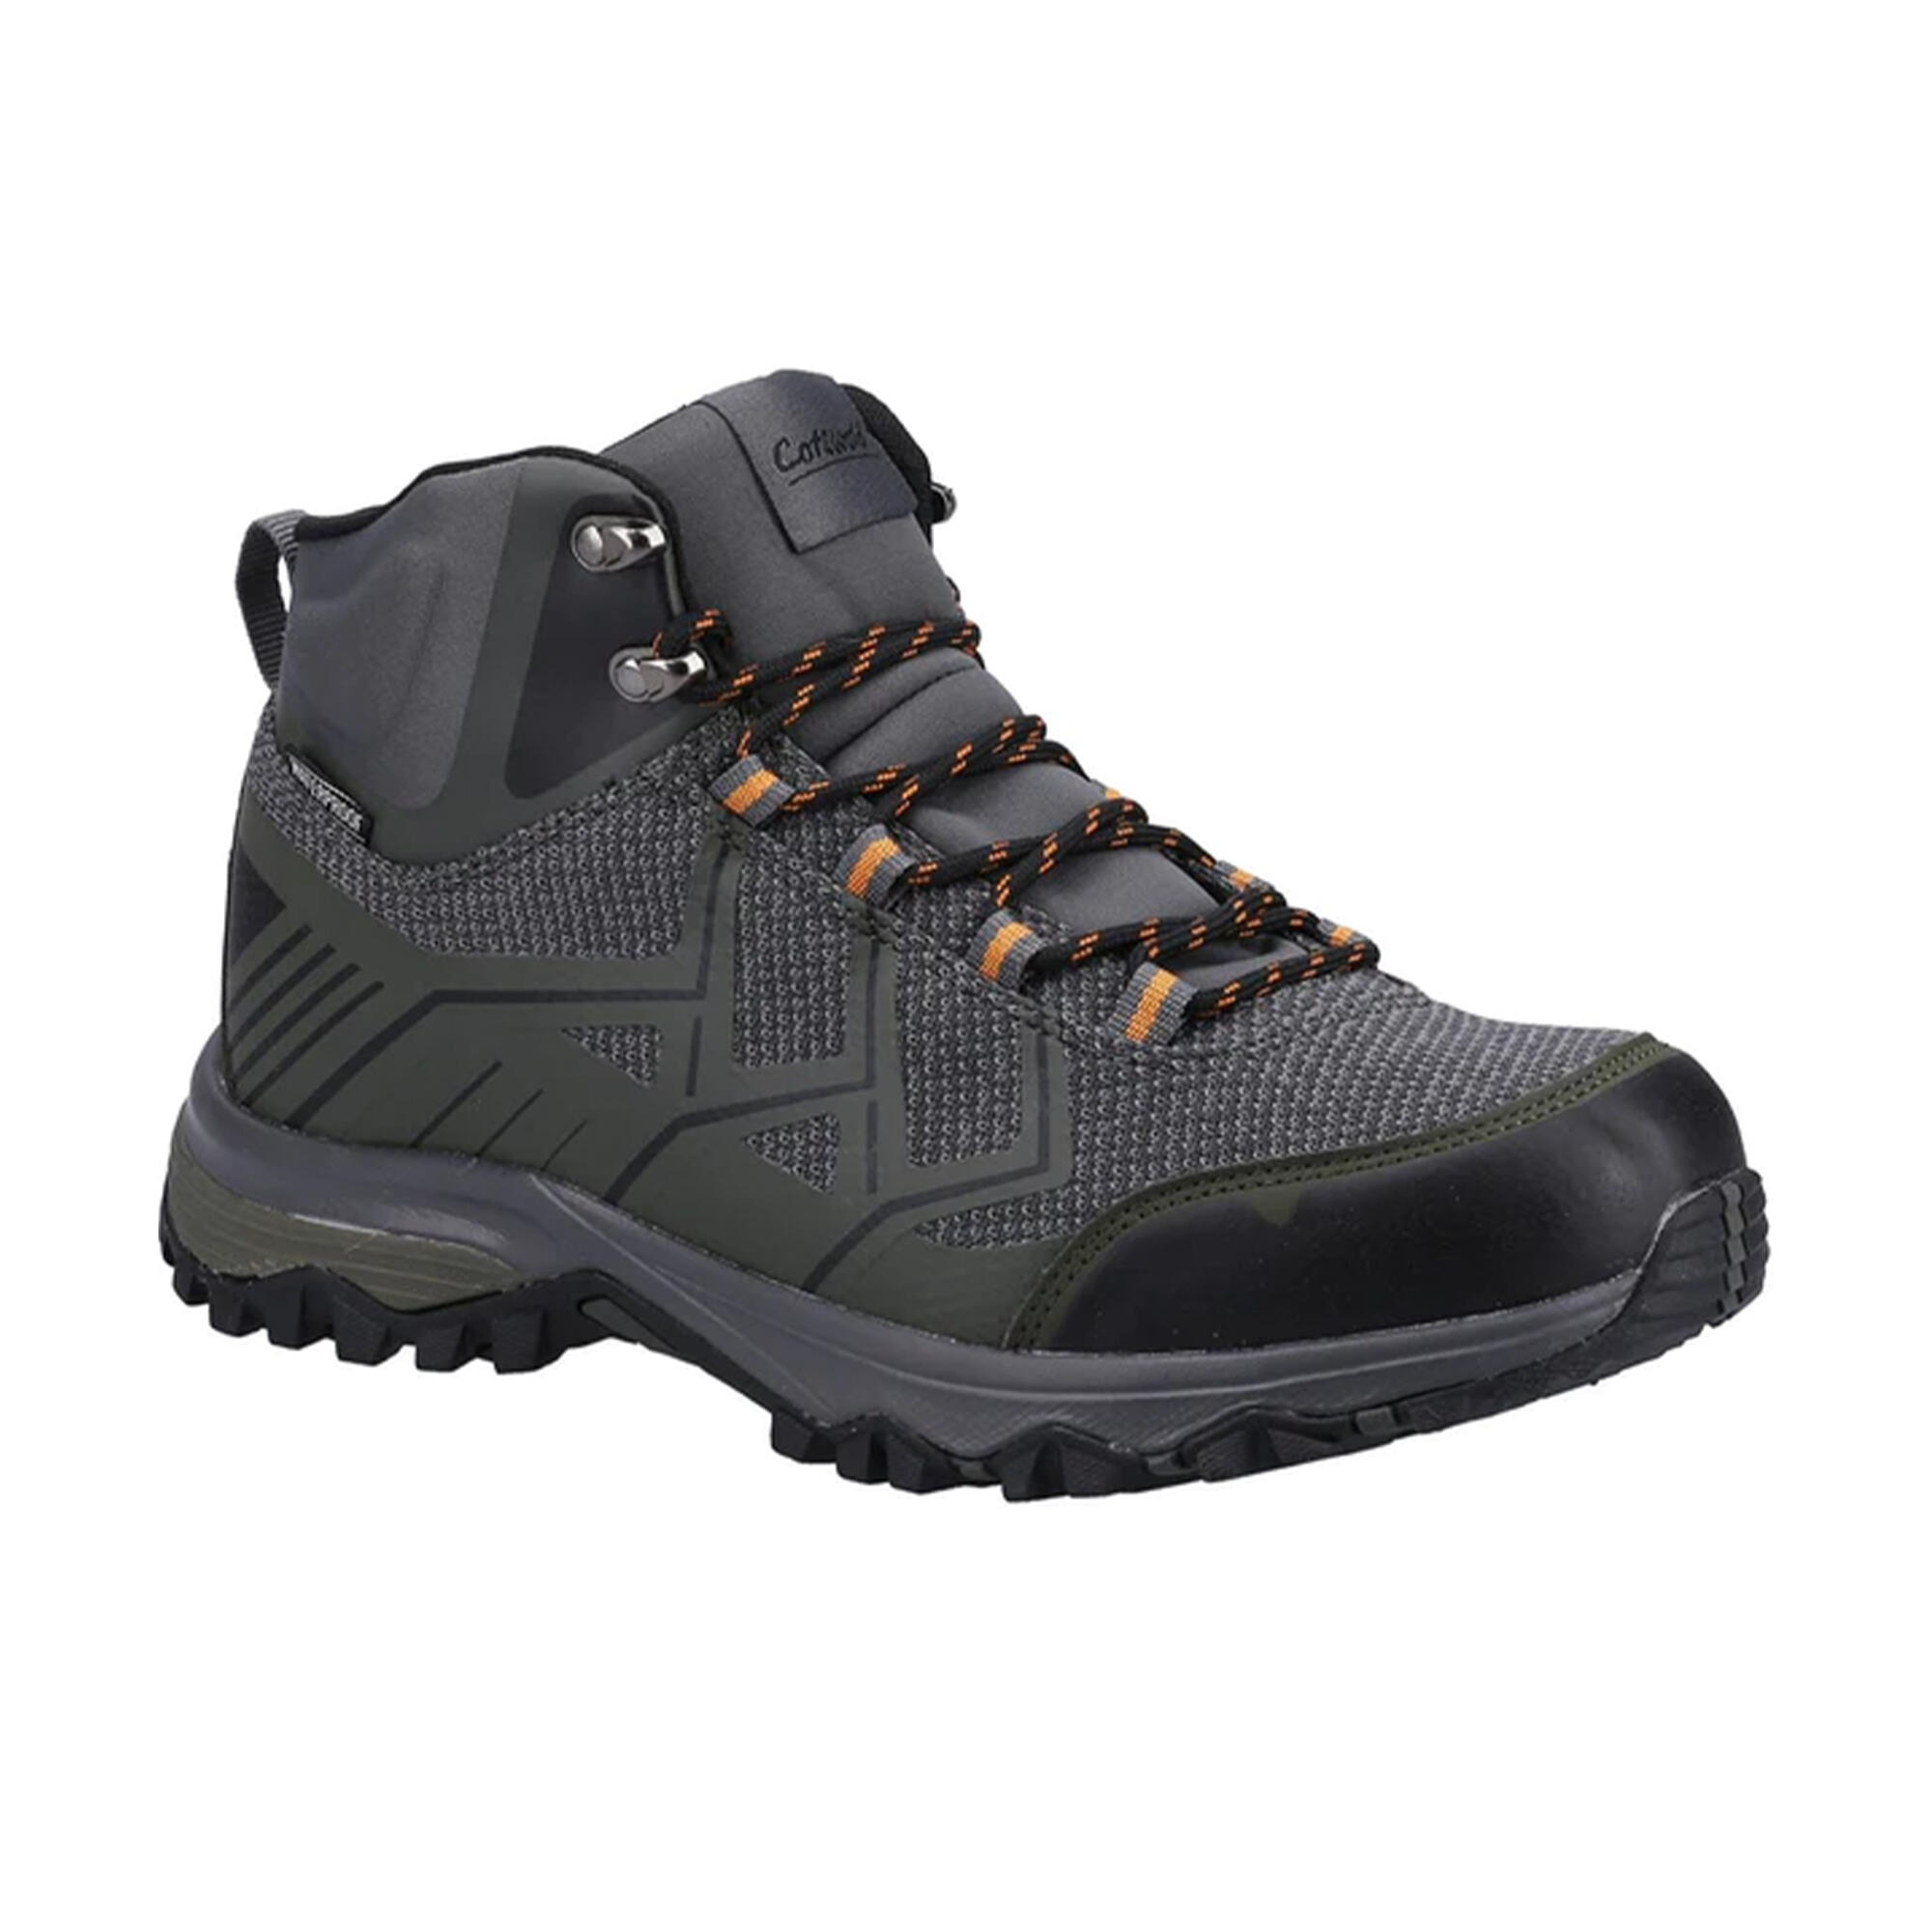 COTSWOLD Mens Wychwood Hiking Boots (Grey)